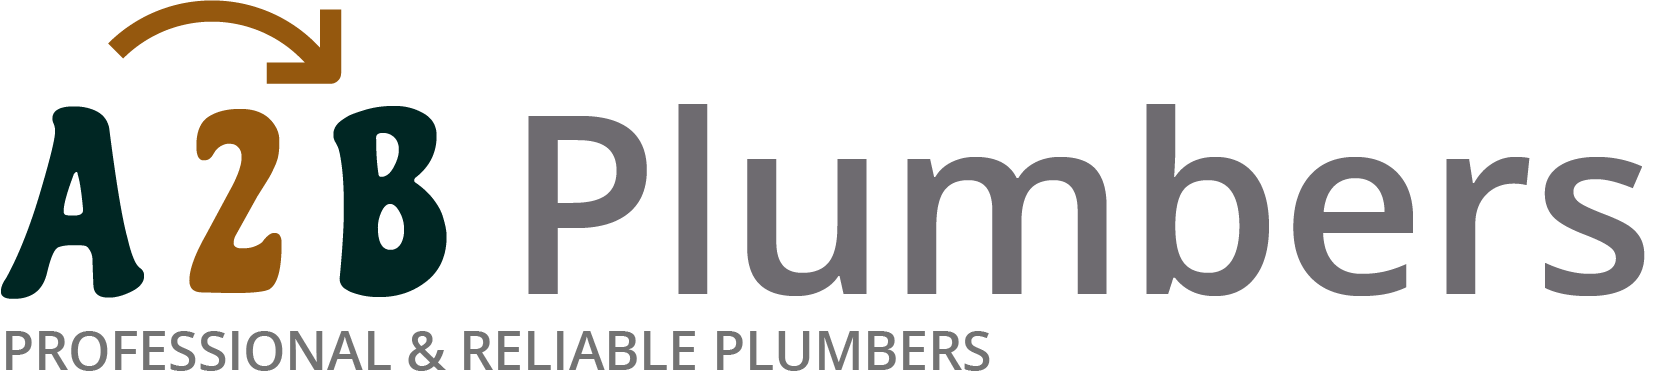 If you need a boiler installed, a radiator repaired or a leaking tap fixed, call us now - we provide services for properties in Poynton and the local area.